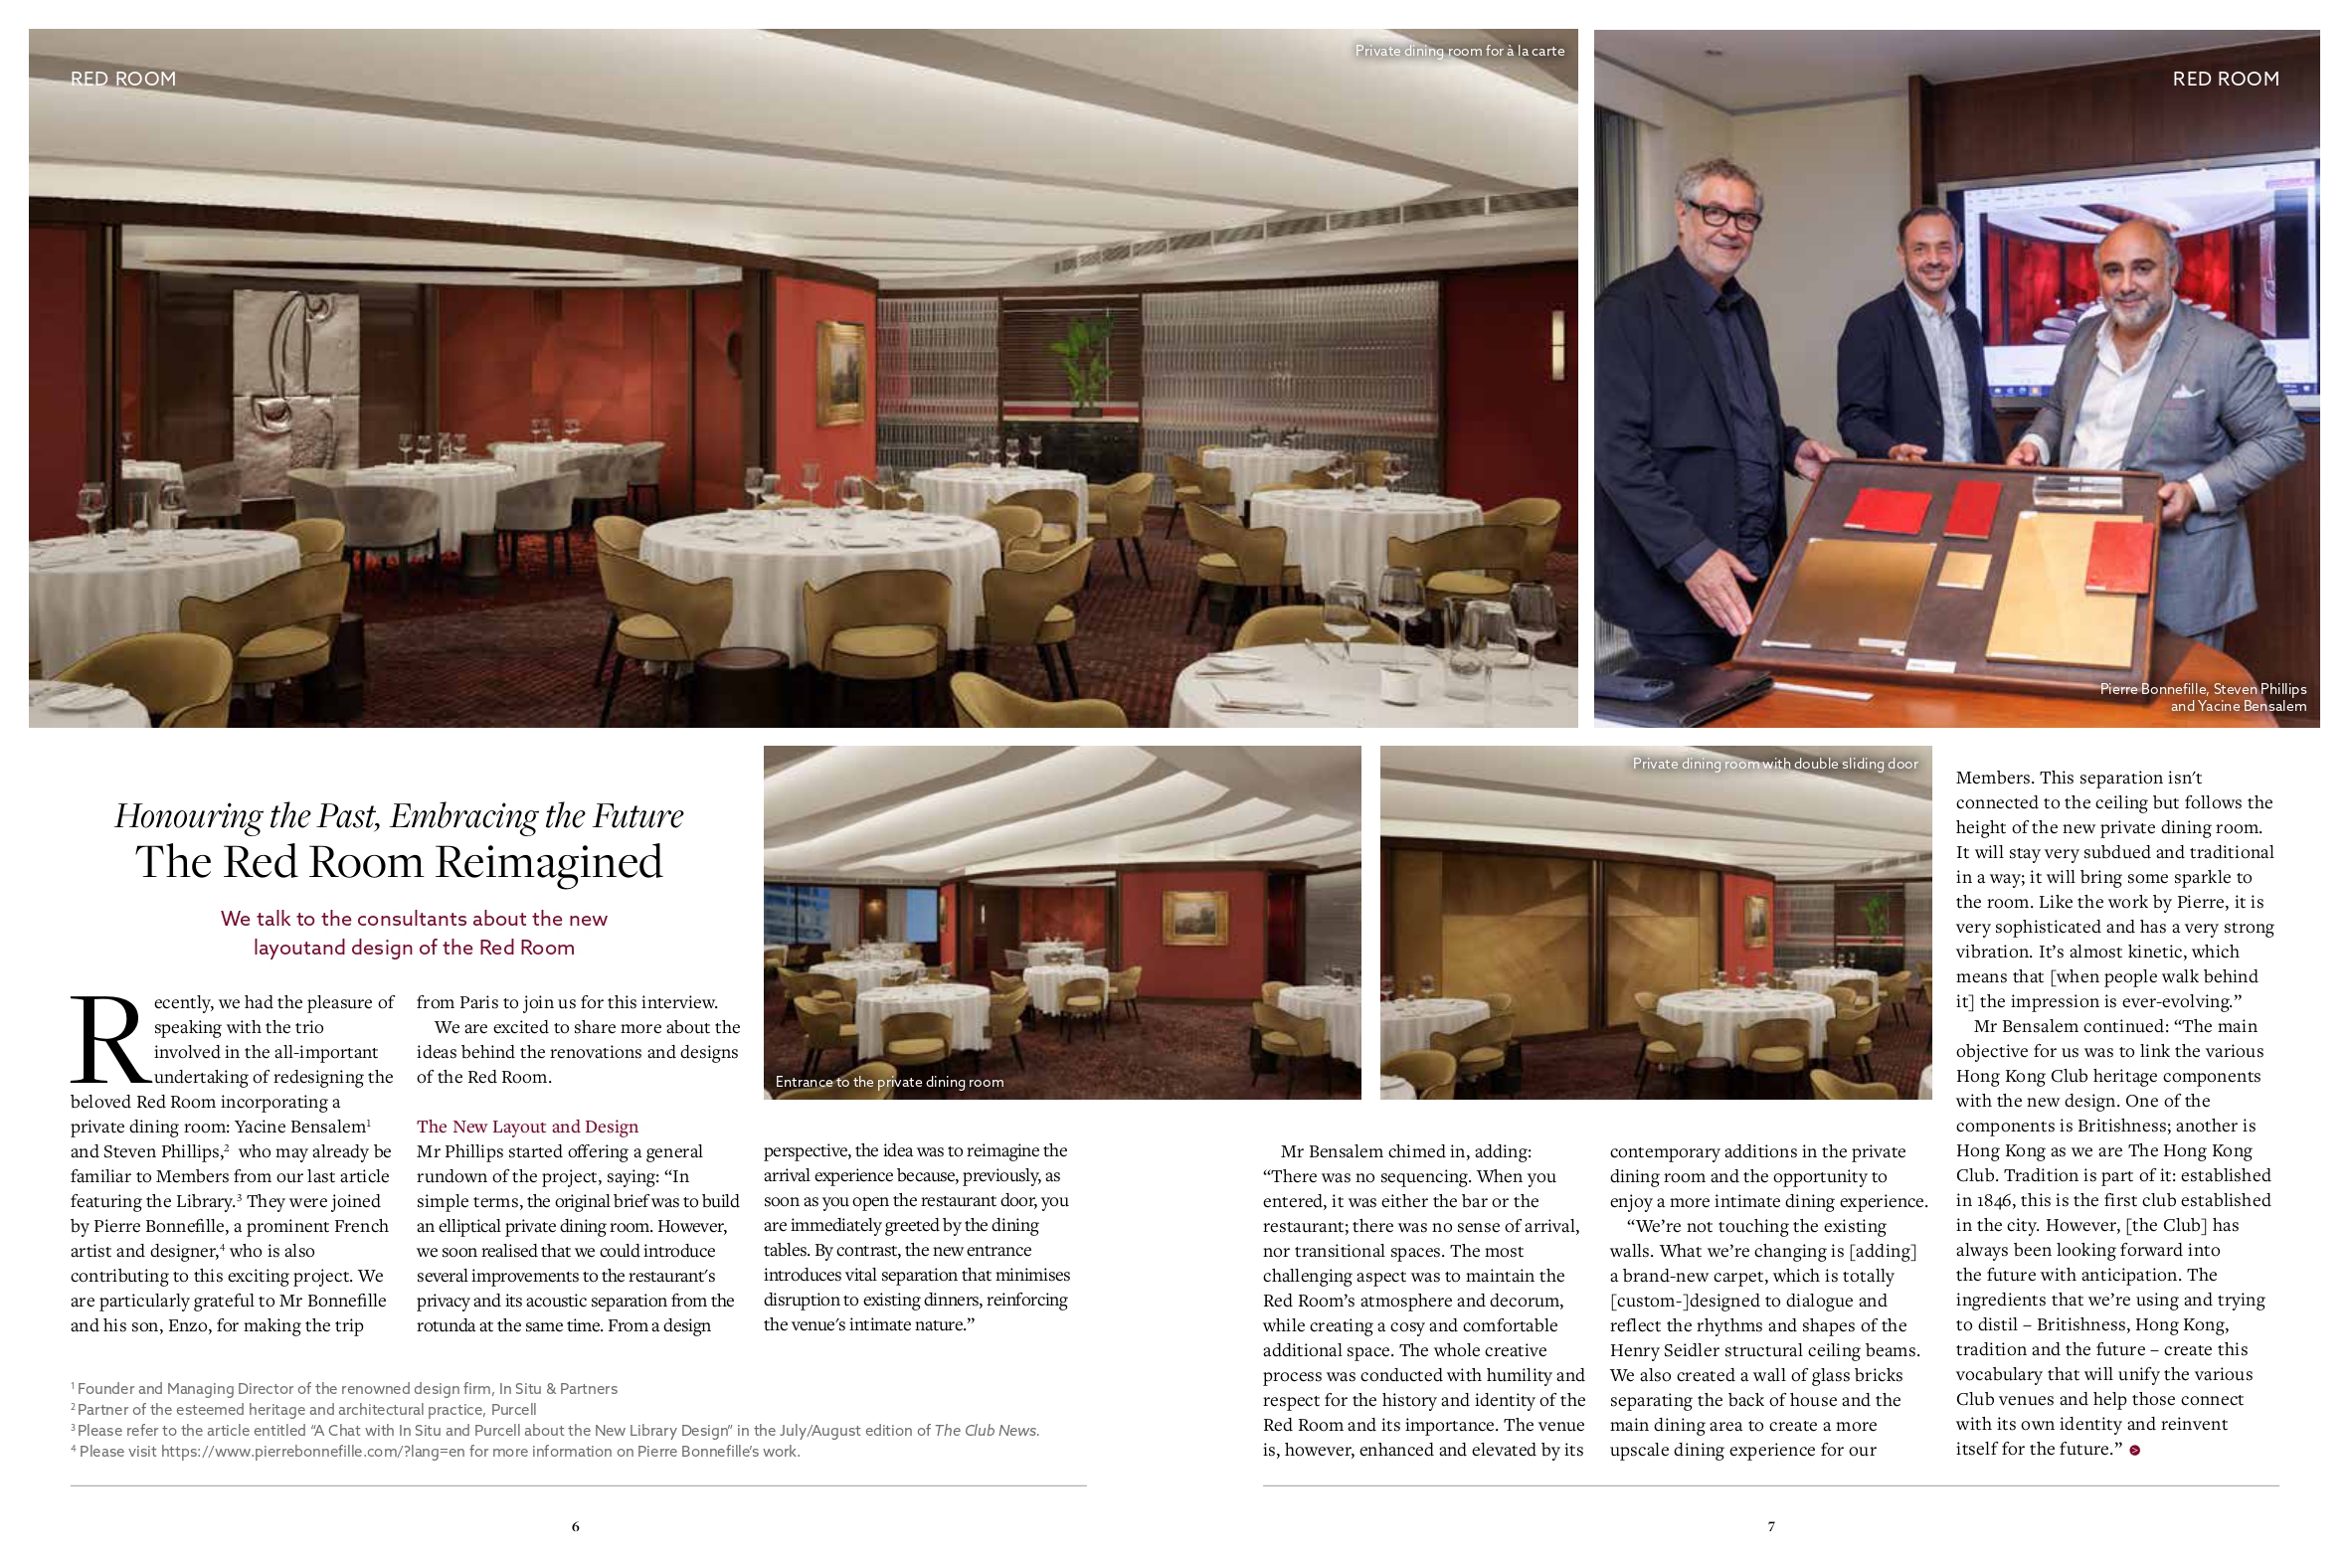 Article in the "Club News" about The Red Room at the Hong Kong Club